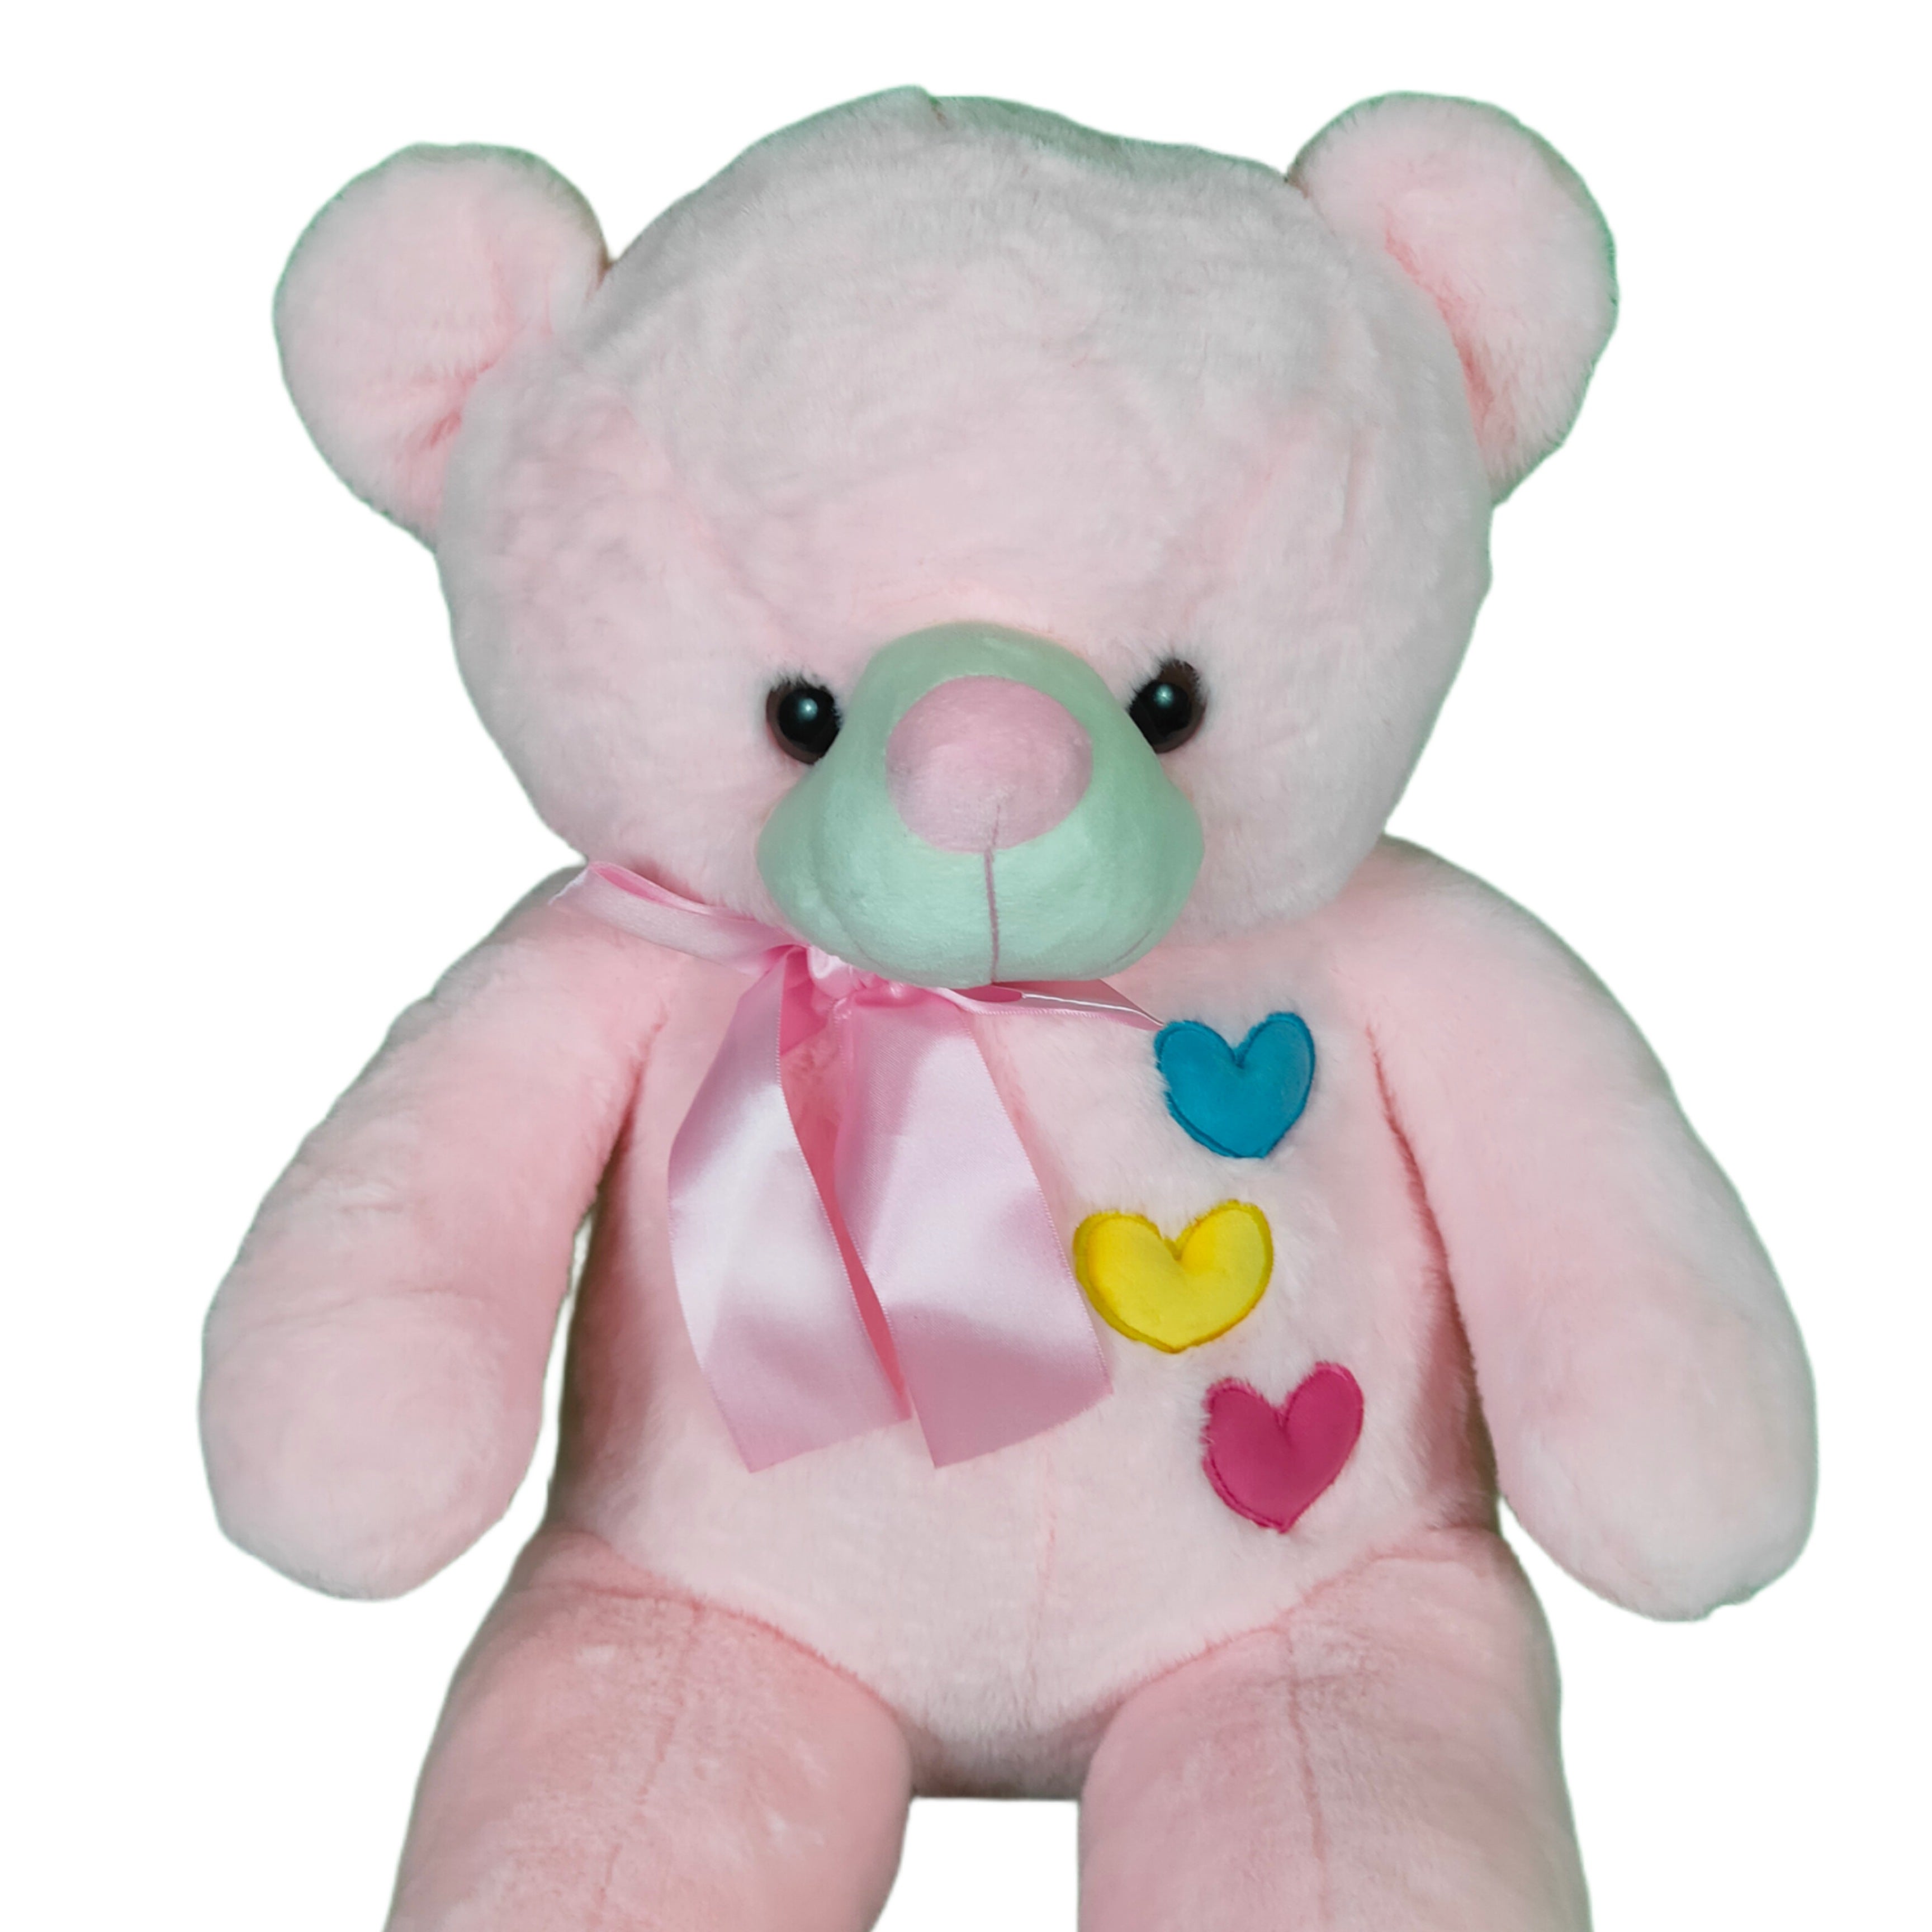 Play Hour Teddy Bear Plush Soft Toy for Ages 3 Years and Up - Pink, 90cm